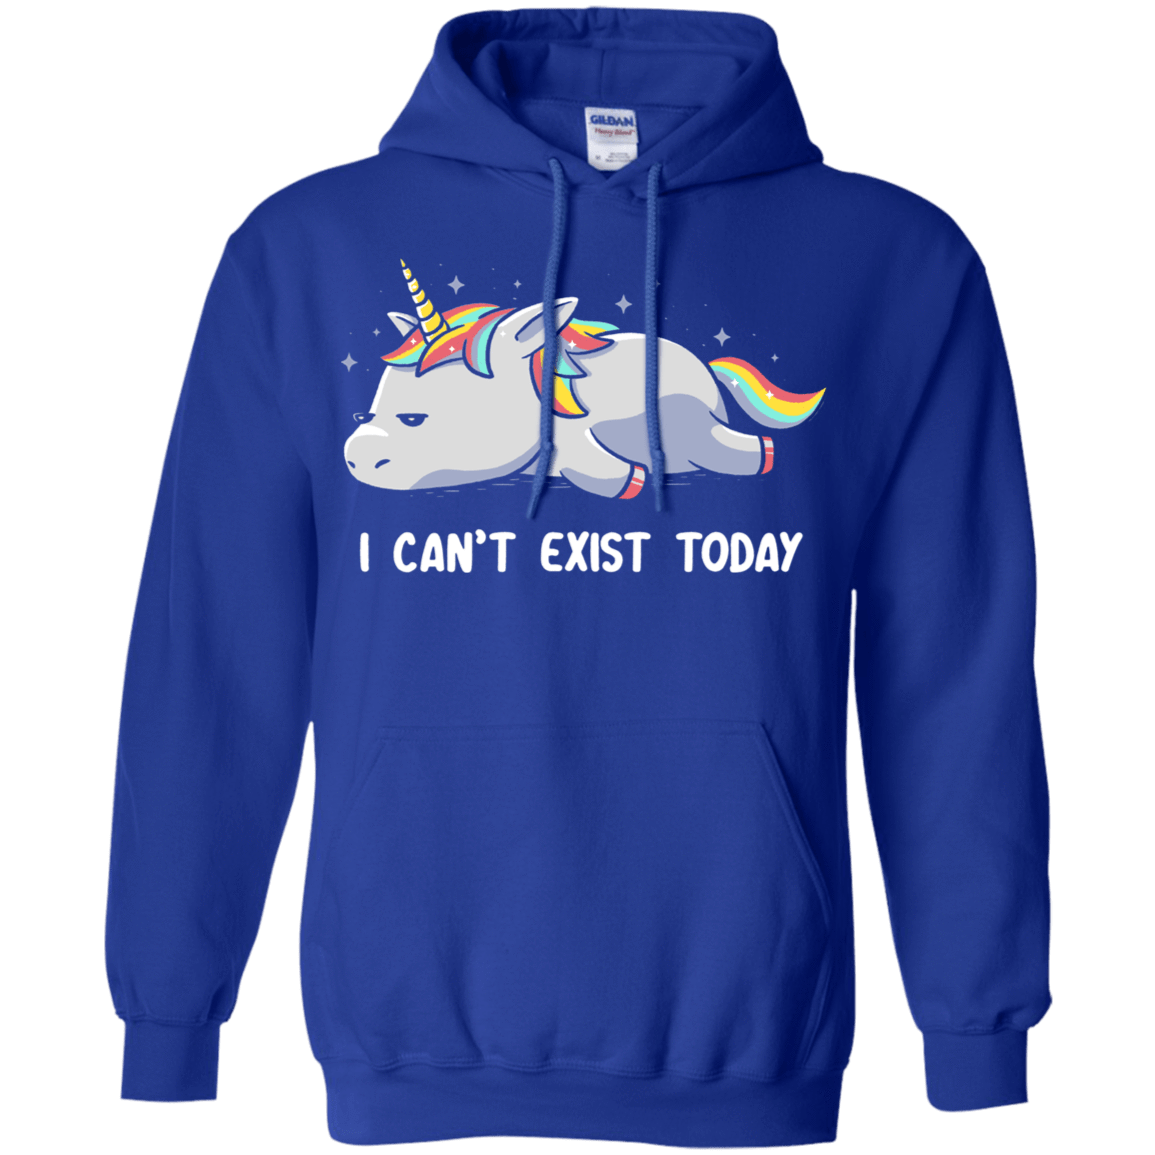 Sweatshirts Royal / S I Can't Exist Today Pullover Hoodie